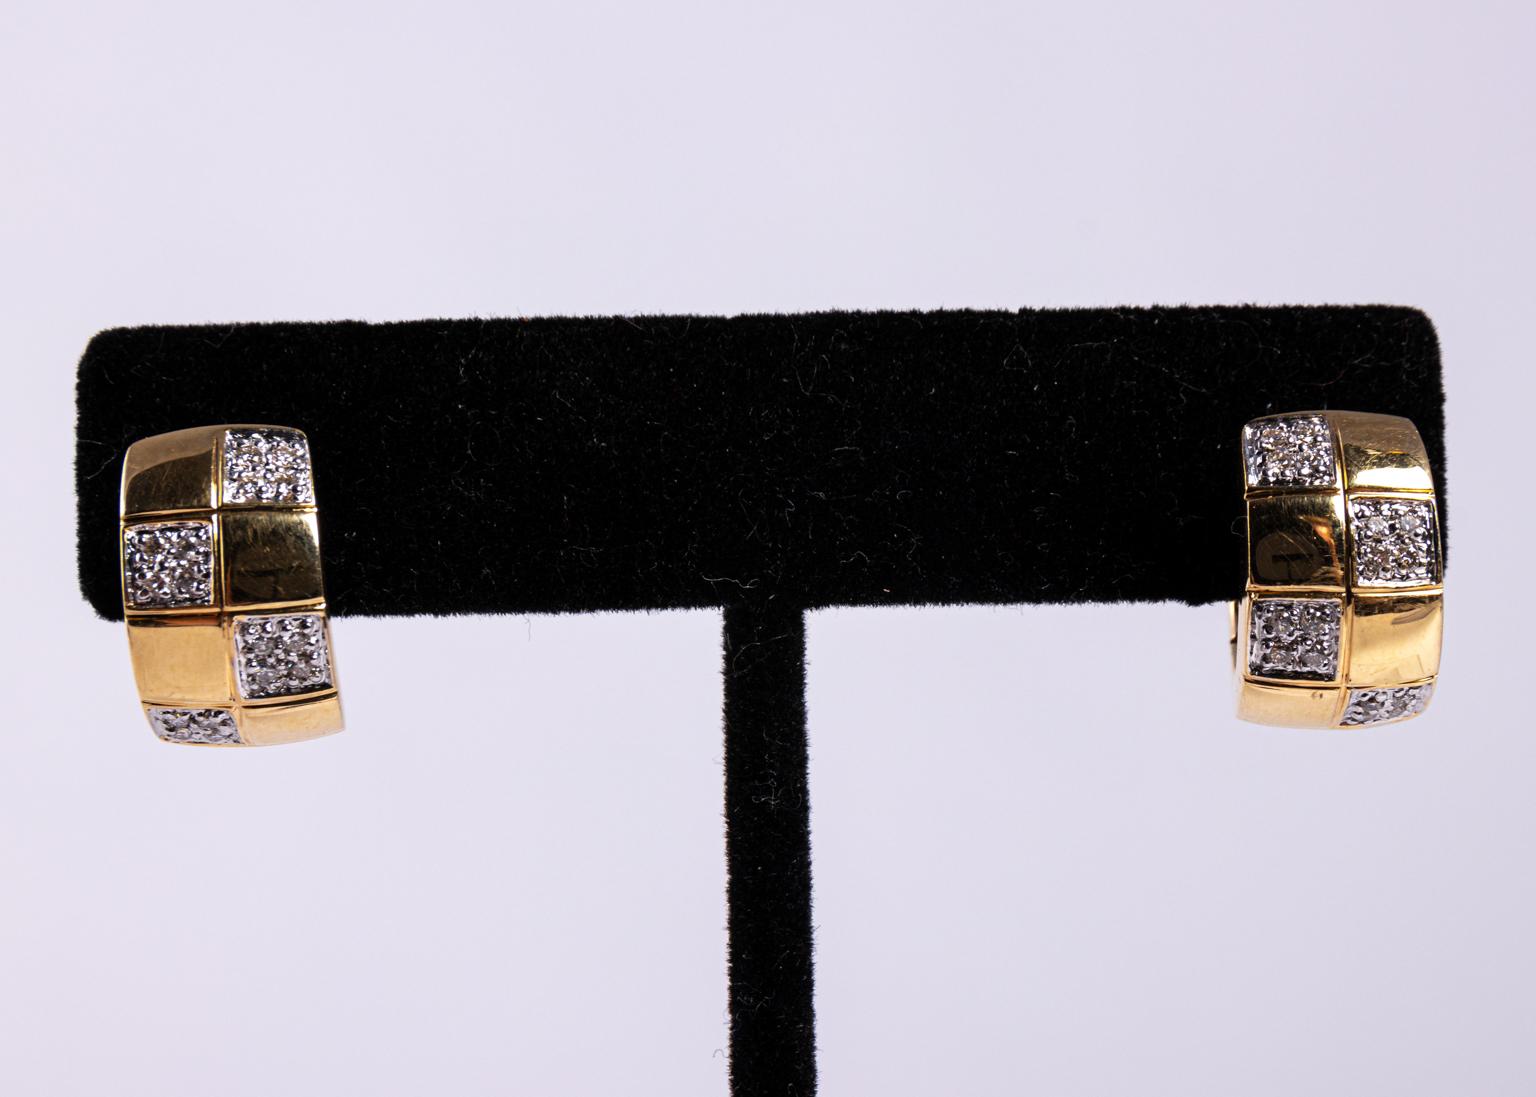 Circa 1980s checkerboard style square 14 karat gold and diamond huggies earrings. These earrings contain 32 diamonds weighing 50 pts in total. The quality includes SI IVS Color H. Please note of wear consistent with age. Jewelry weight 7.2 Grams. 